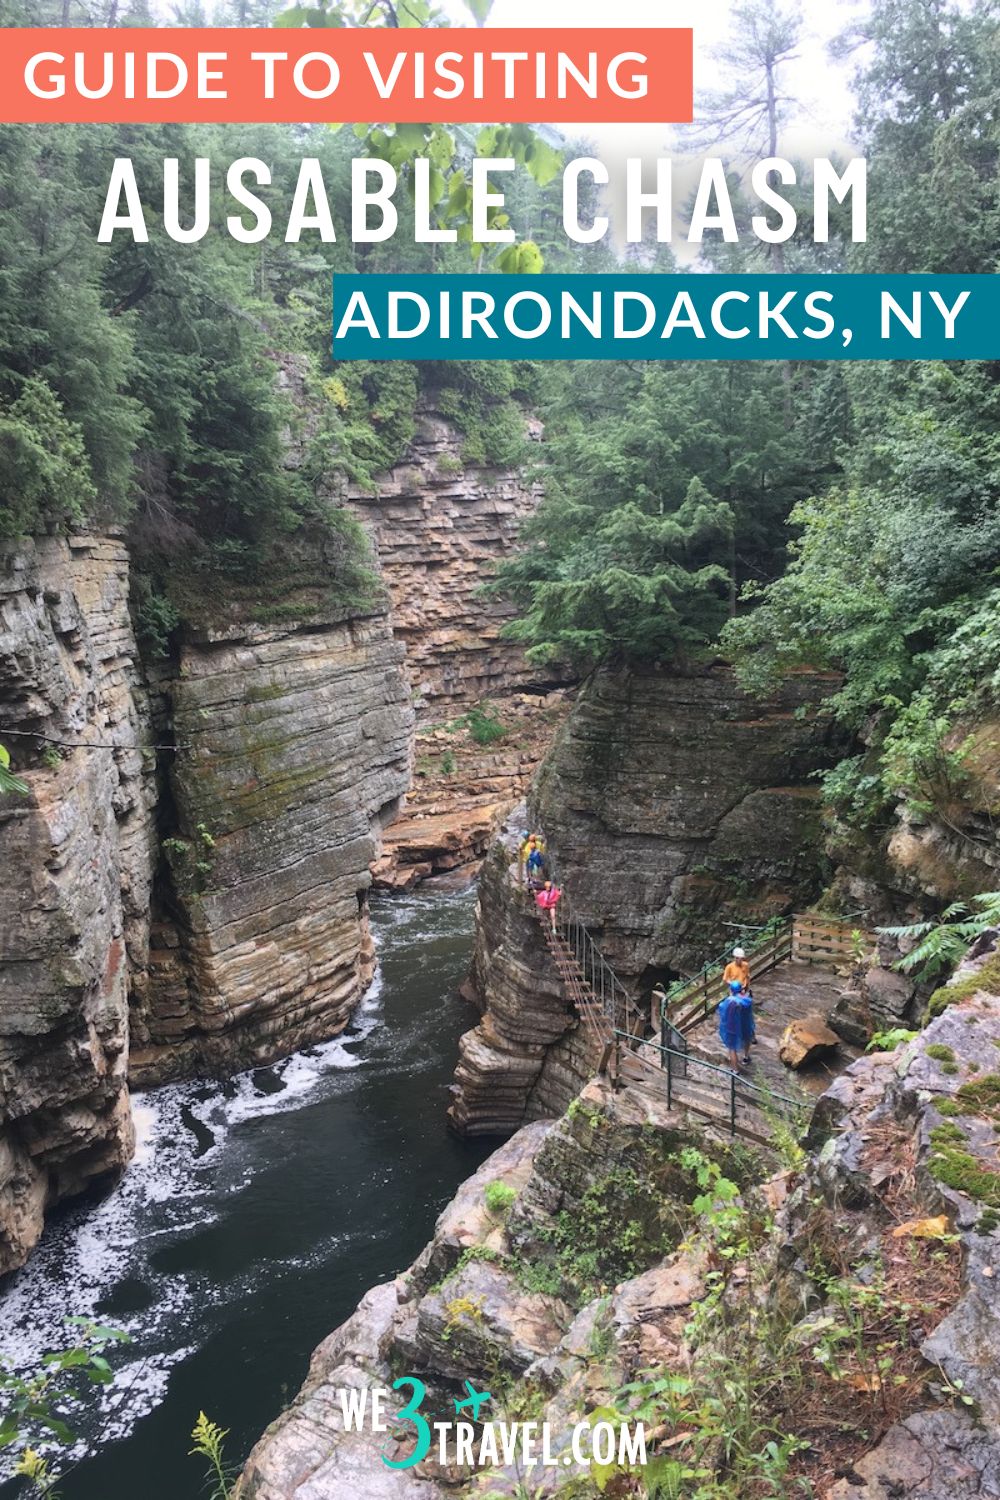 Did you know there was a "Grand Canyon of the Adirondacks"? Find out everything you need to know before you go in this Ausable Chasm review. If you are visiting the Adirondack Mountains in New York, including Lake Placid or Lake George, be sure to add this to your vacation itinerary.